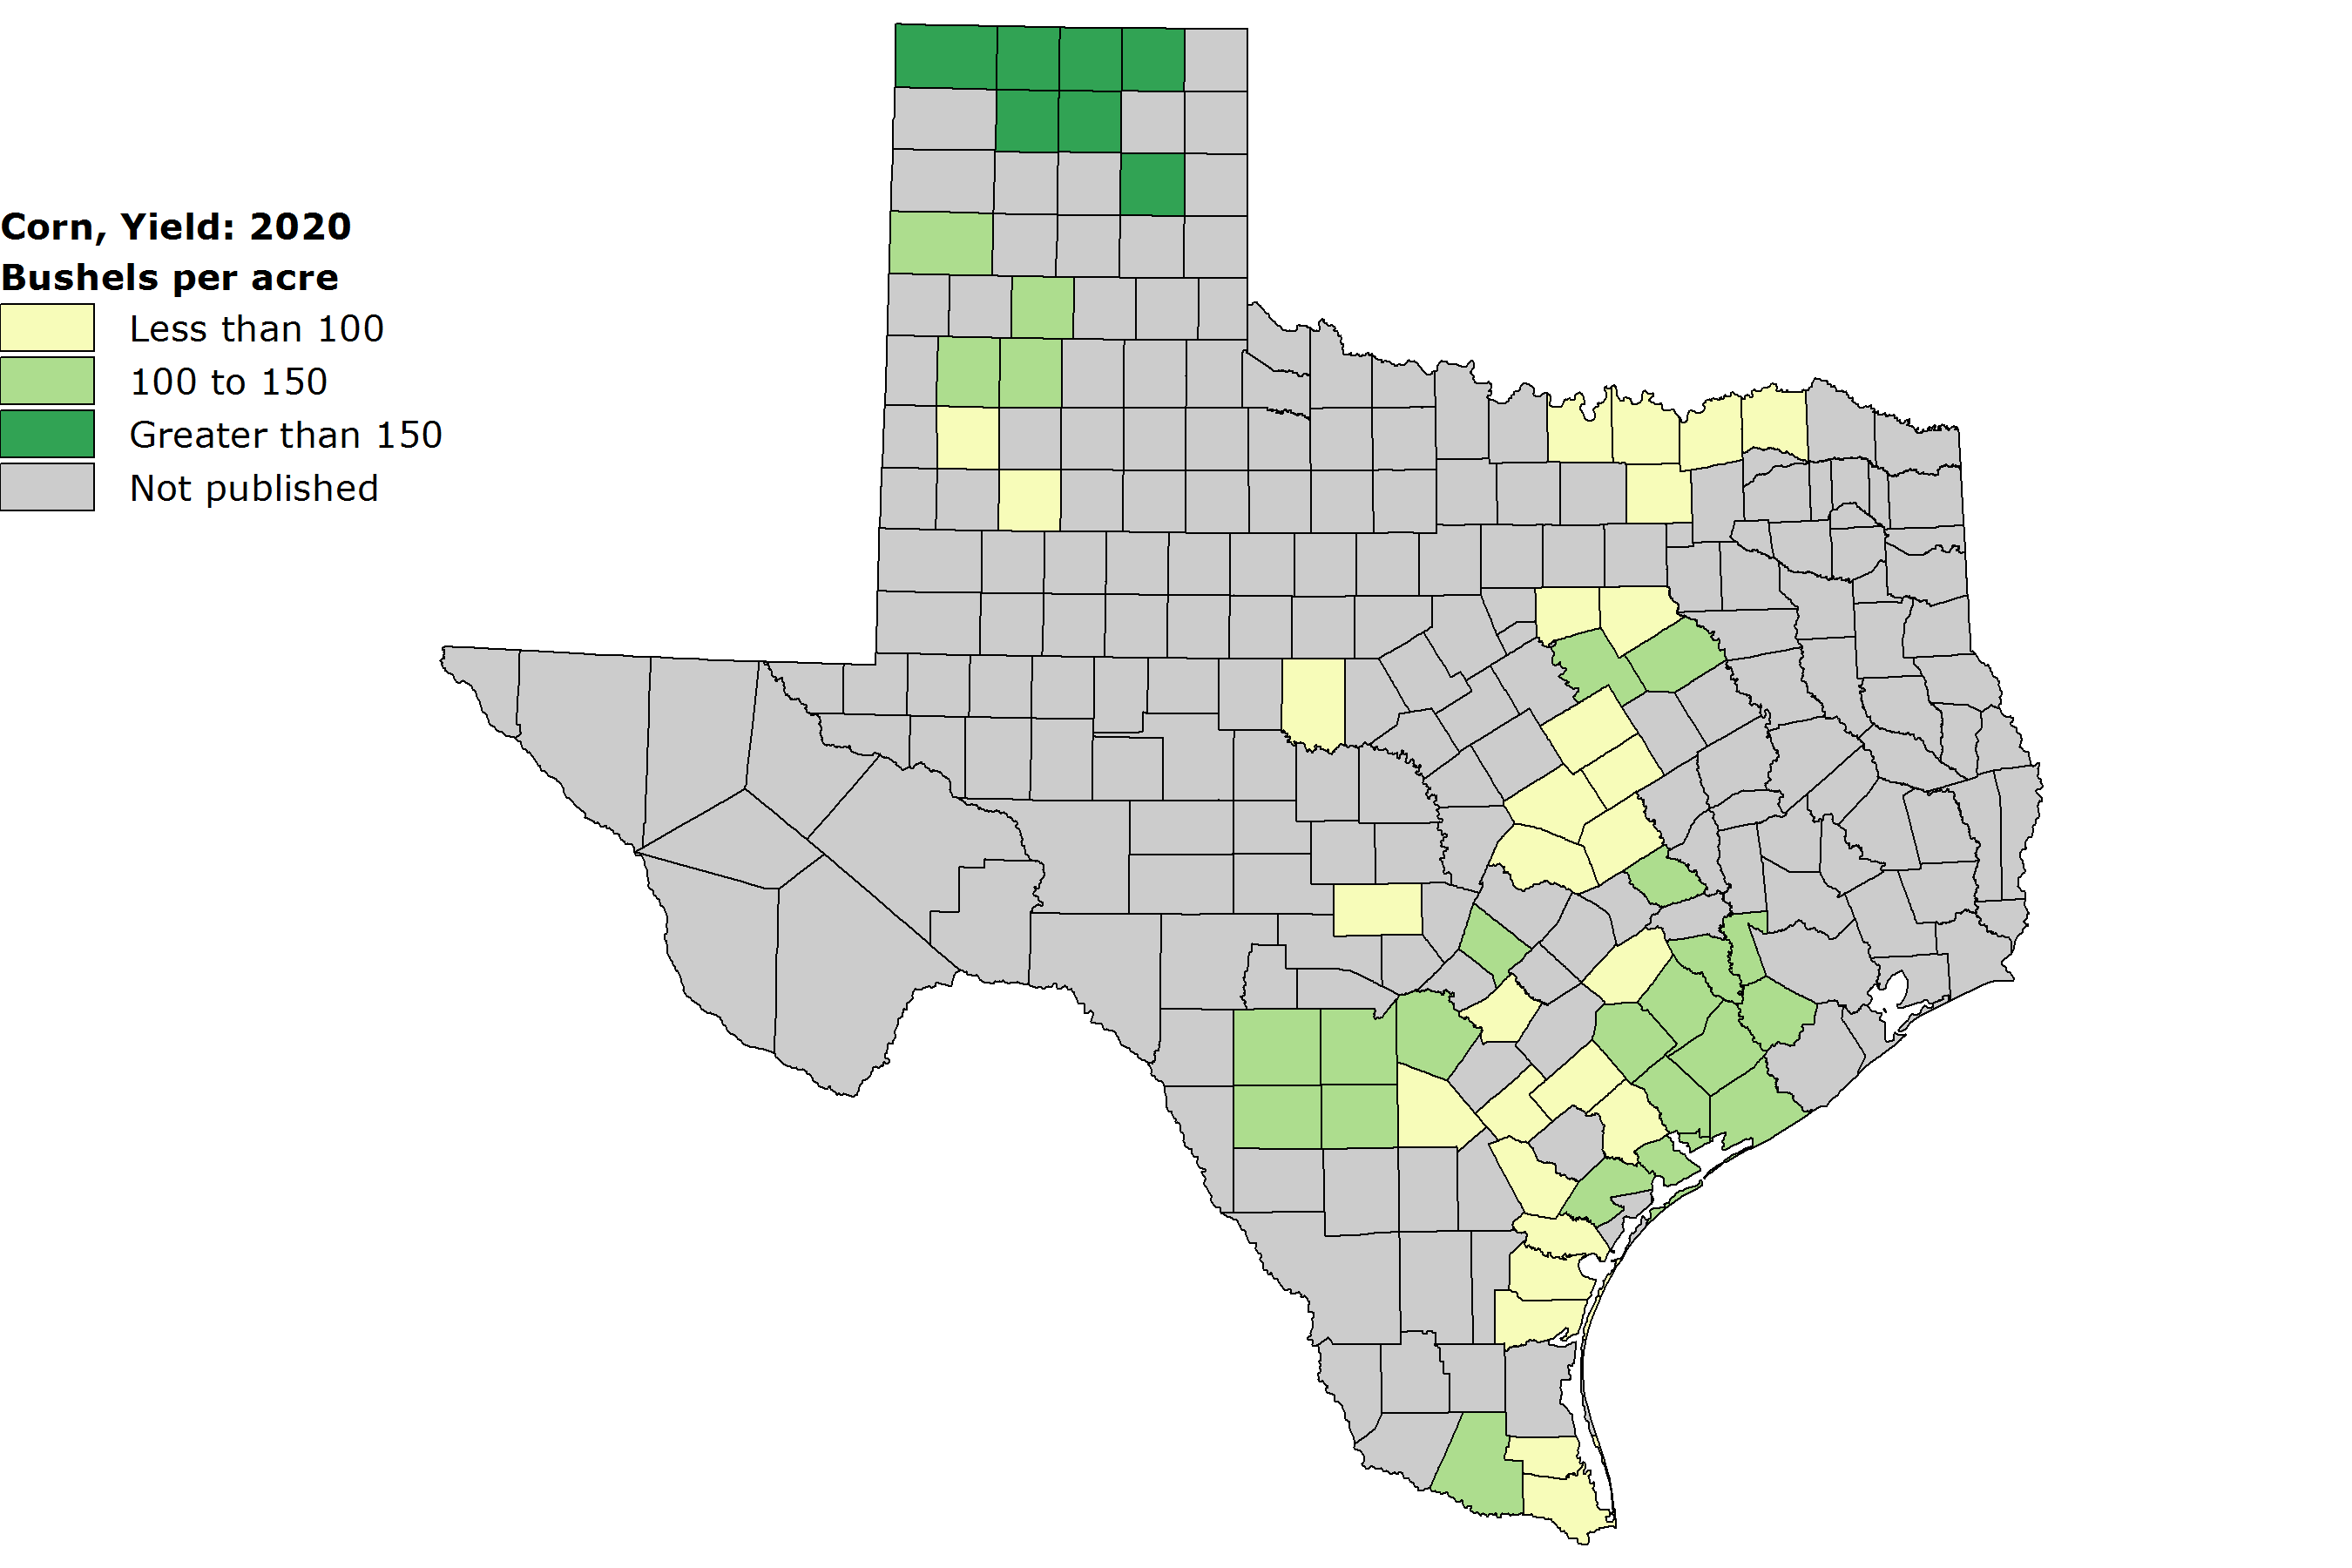 A shaded map of Texas showing the average yield of corn bushels per acre by county.